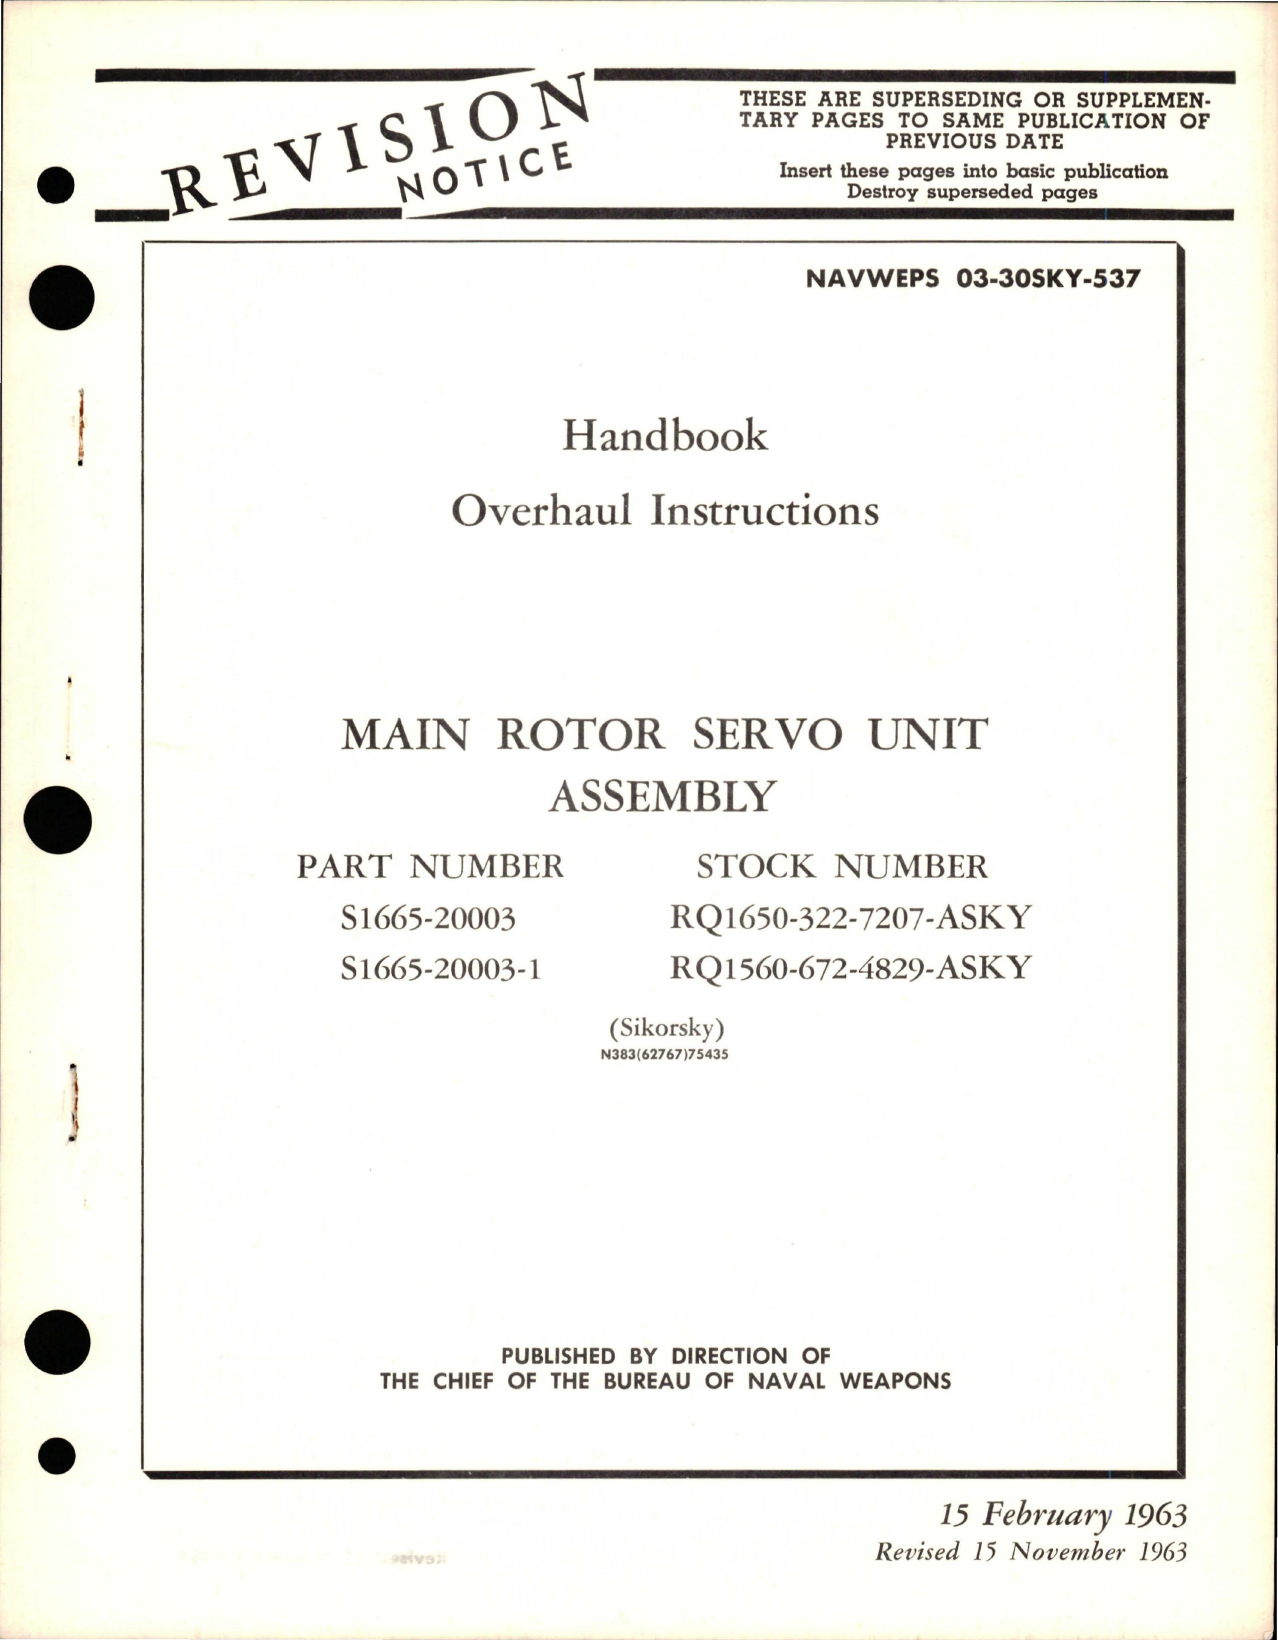 Sample page 1 from AirCorps Library document: Overhaul Instructions for Motor Rotor Servo Unit Assembly - Parts S1665-20003 and S1665-20003-1